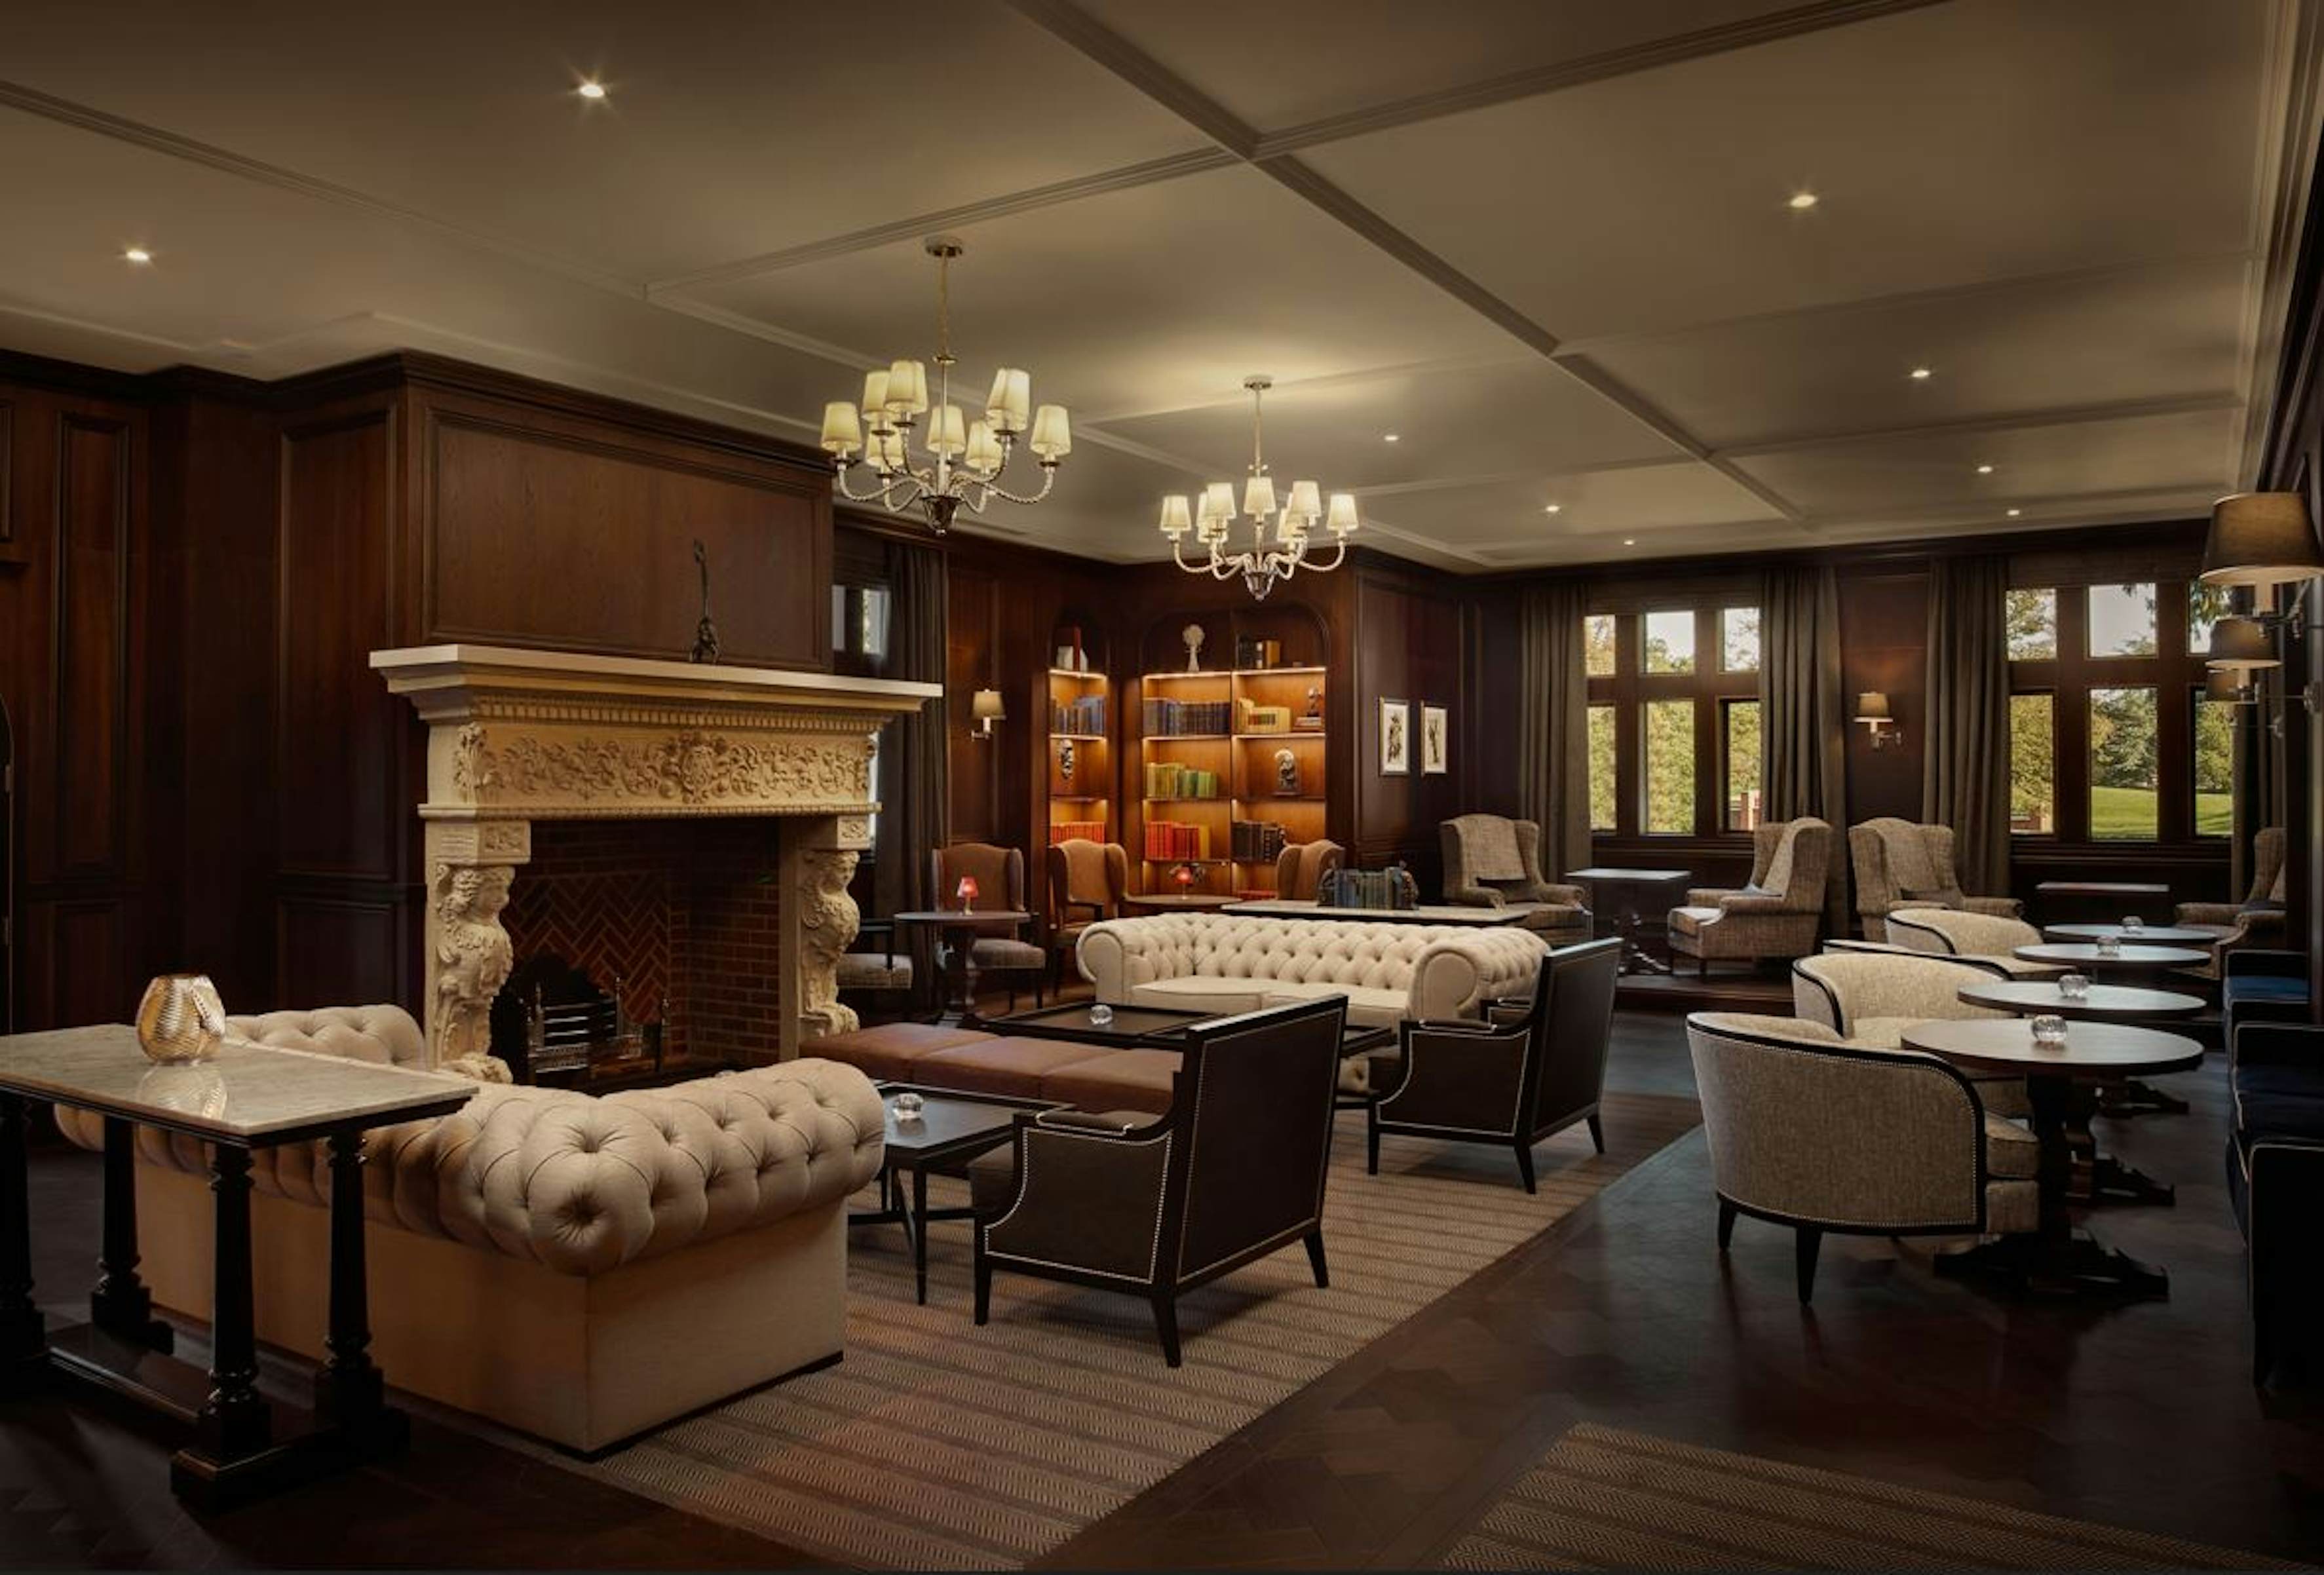 Fairmont Windsor Park - The Library Club image 1